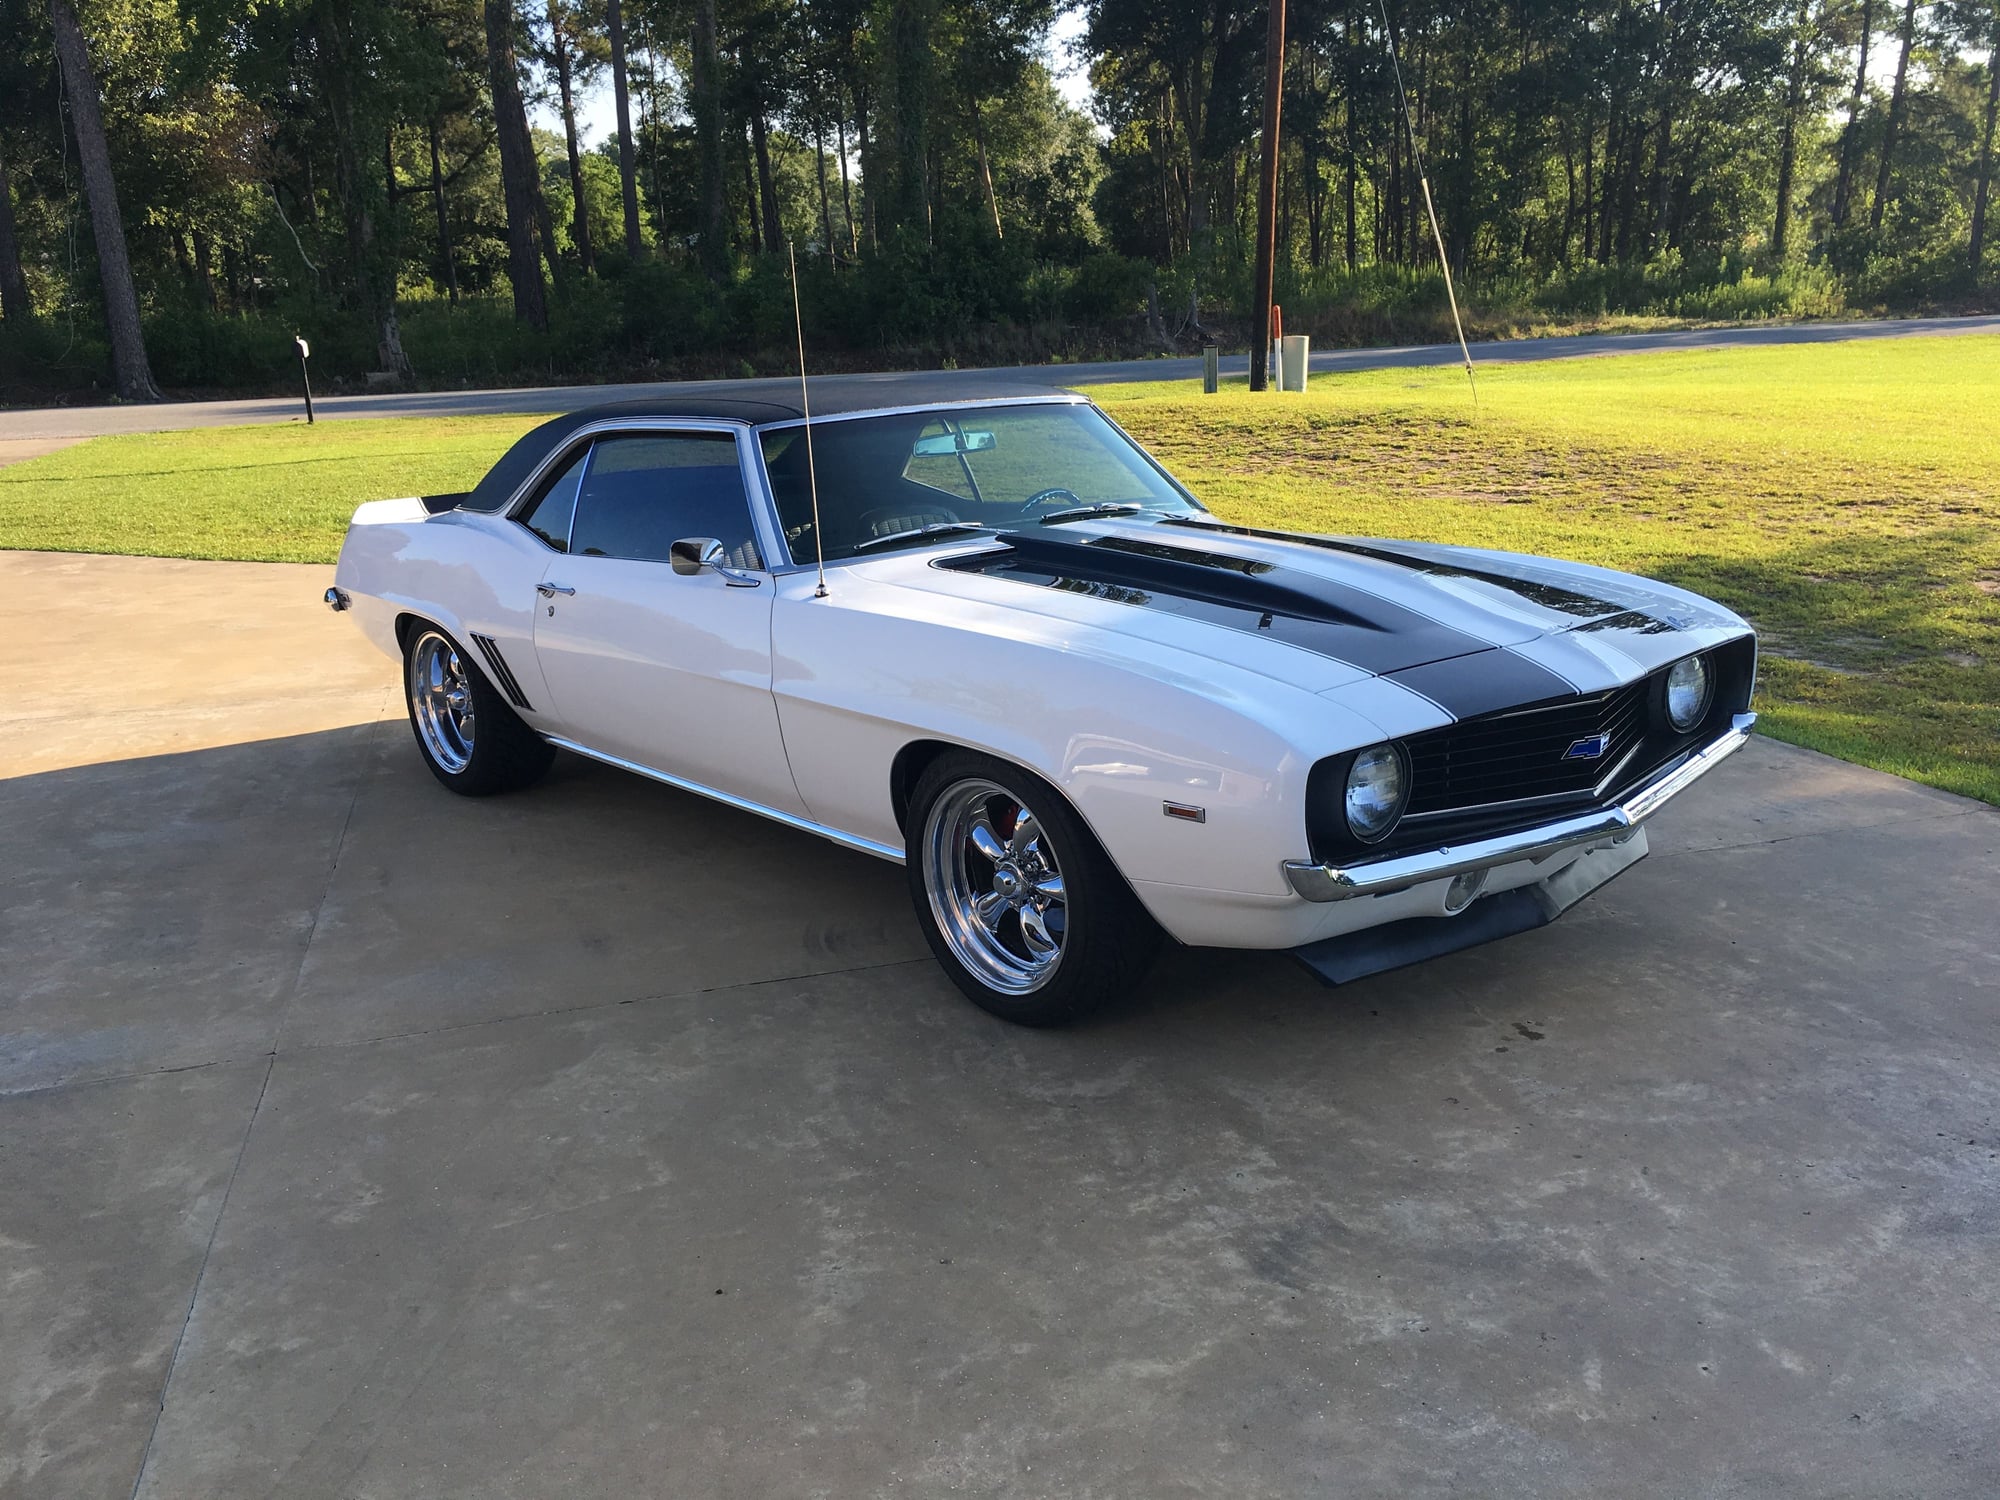 1969 Chevrolet Camaro - 1969 LS1 Camaro Pro Touring - Used - VIN 1Z3379N651850 - 8 cyl - 2WD - Automatic - Coupe - White - Lake Charles, LA 70601, United States